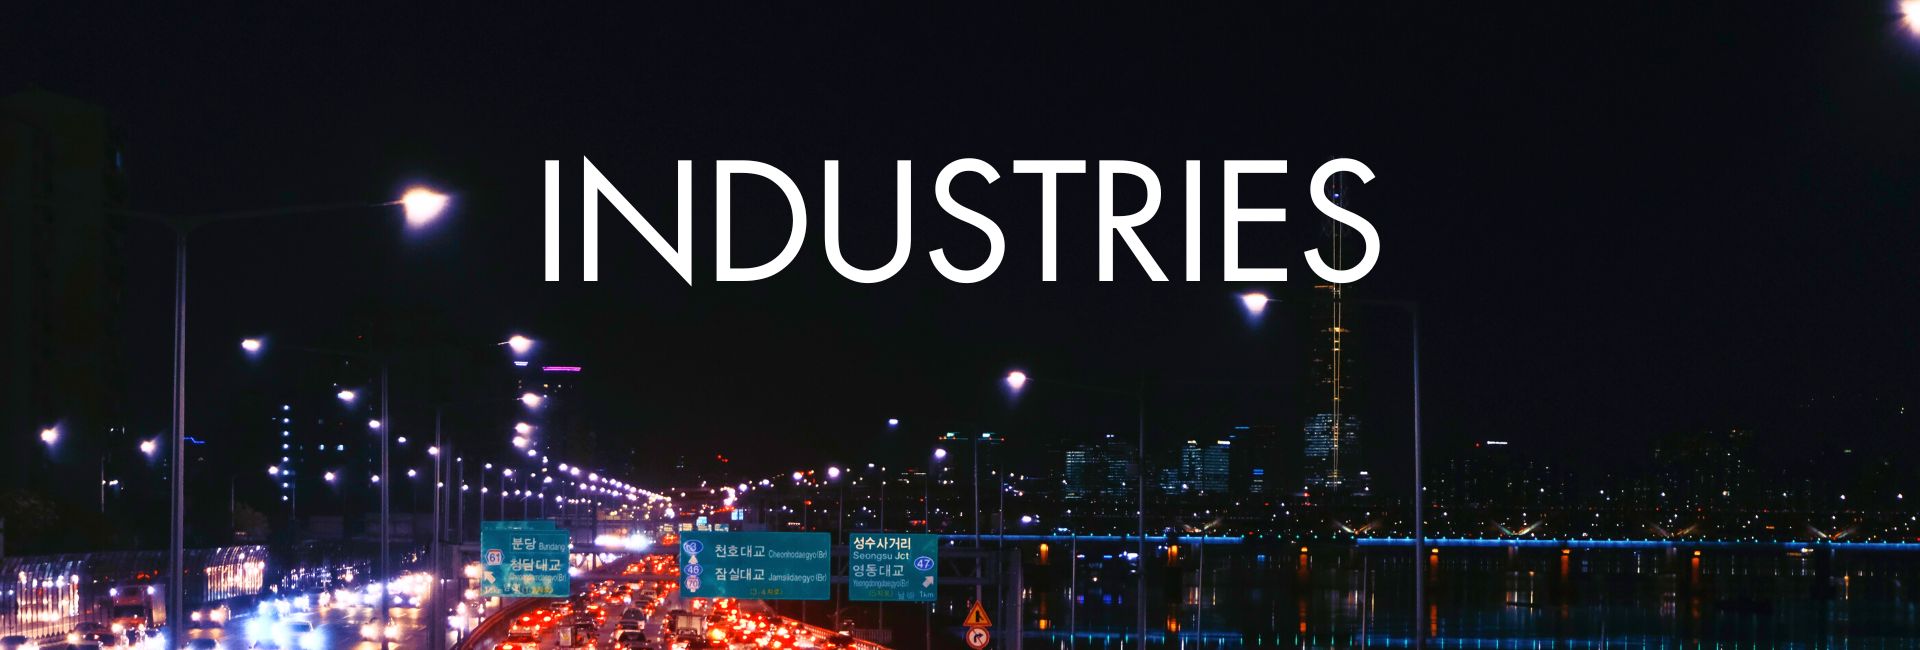 Industries Banner Image